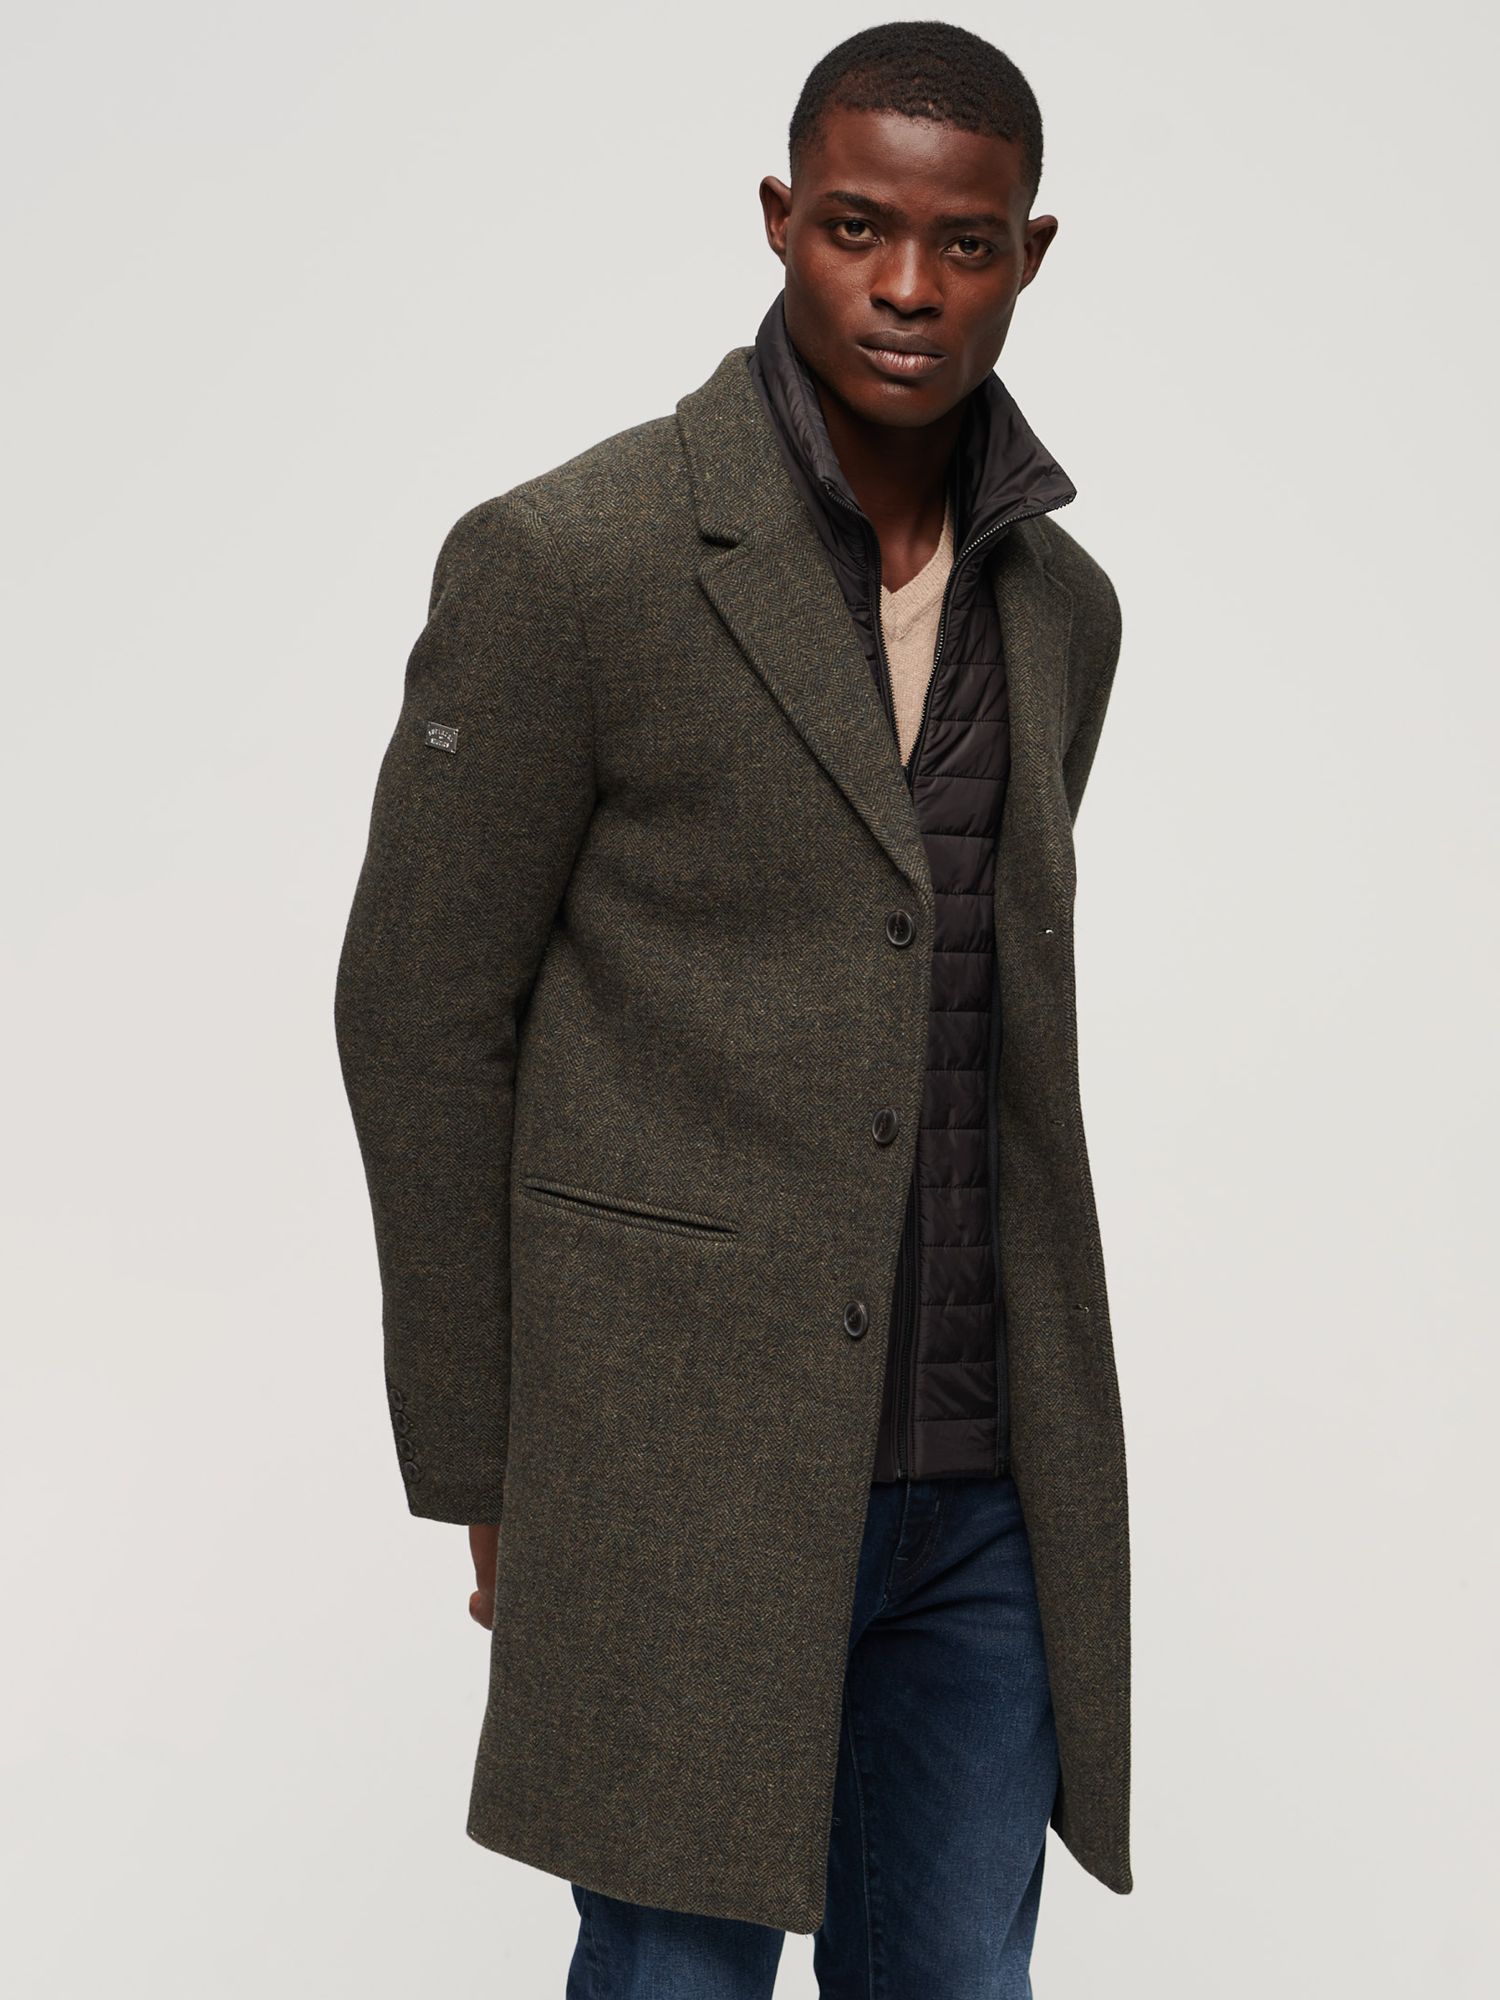 Superdry 2 In 1 Wool Town Coat, Forest Green Tweed, S